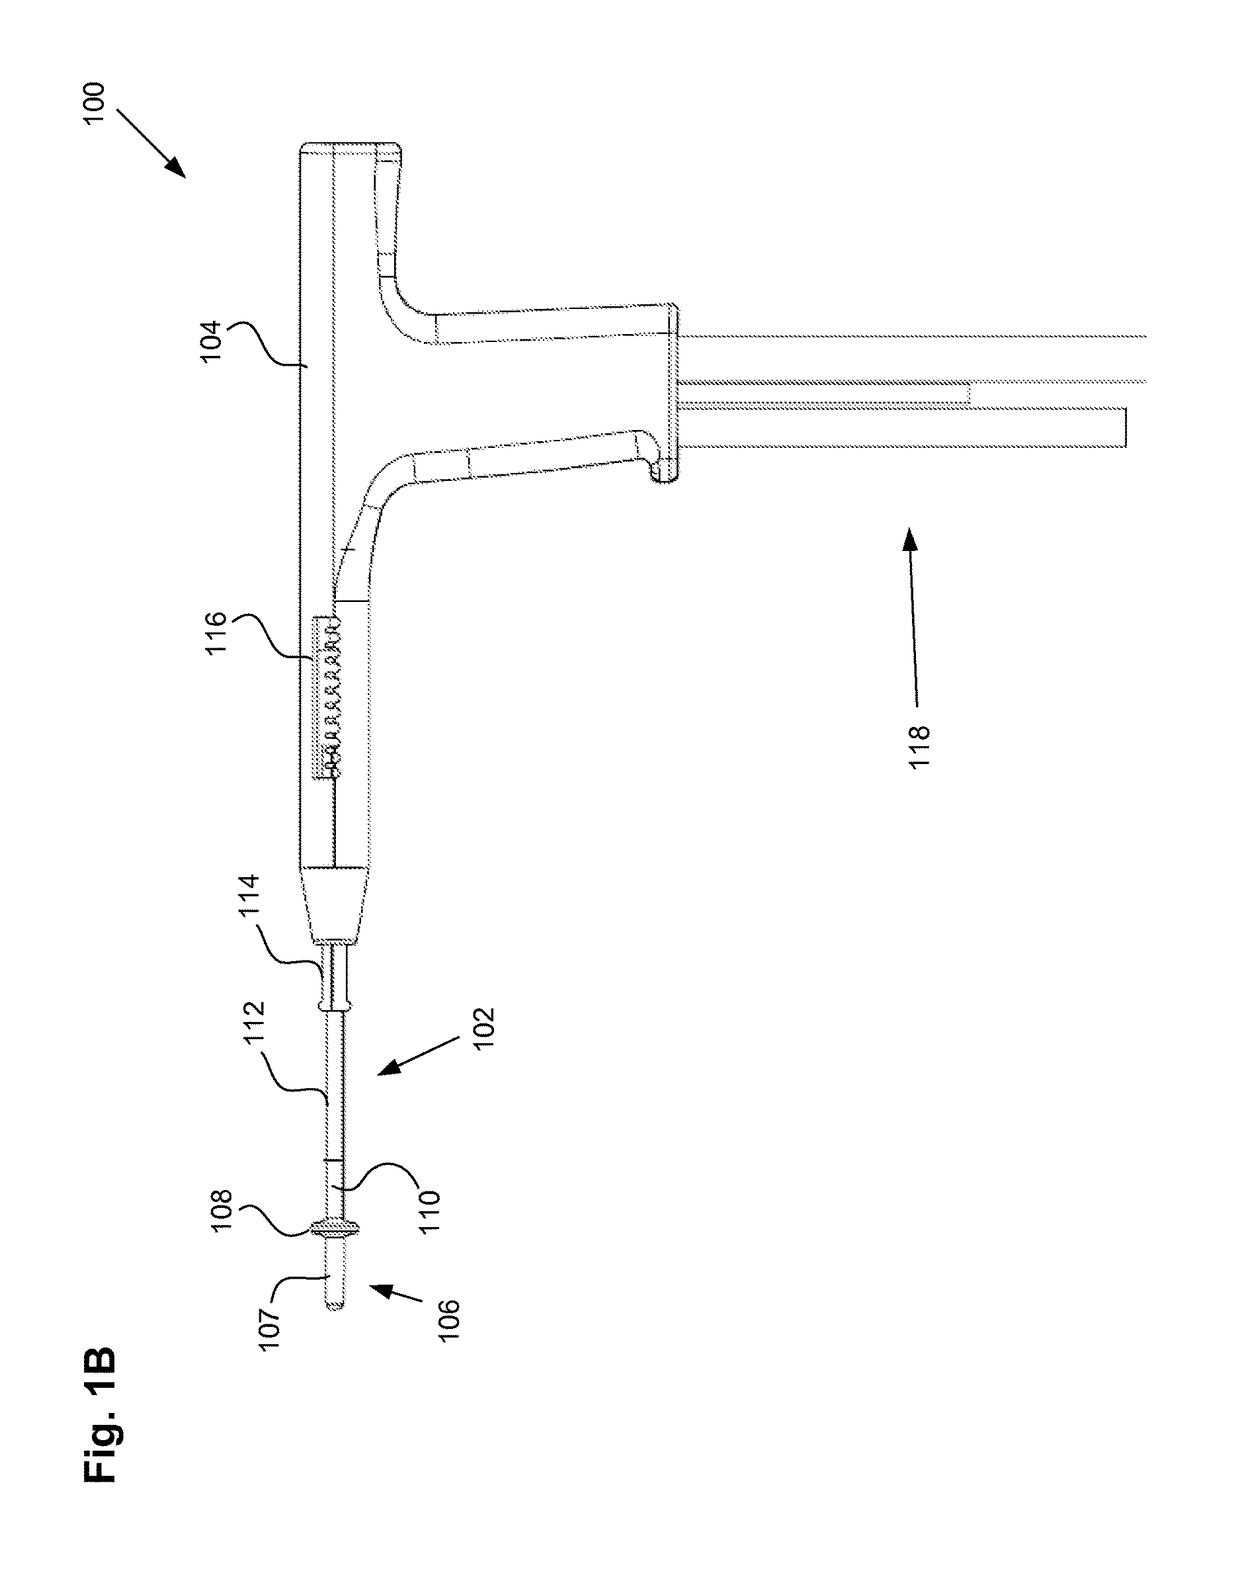 Positioning method and apparatus for delivering vapor to the uterus